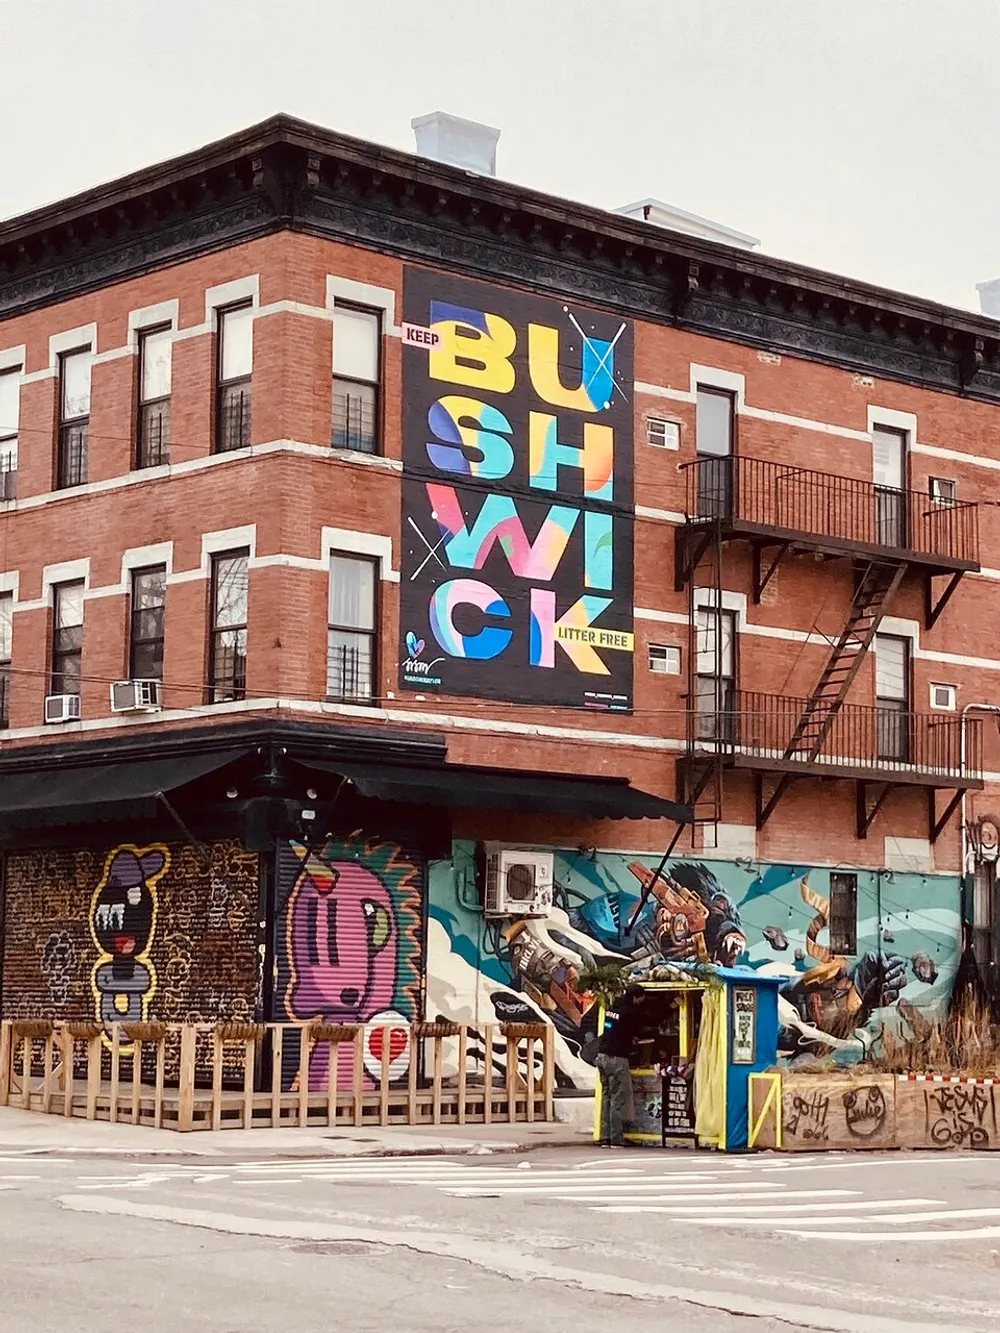 The image shows an urban street corner with a red brick building adorned with vibrant street art including a large mural spelling BUSHWICK with more colorful graffiti and a food vendor stand at street level